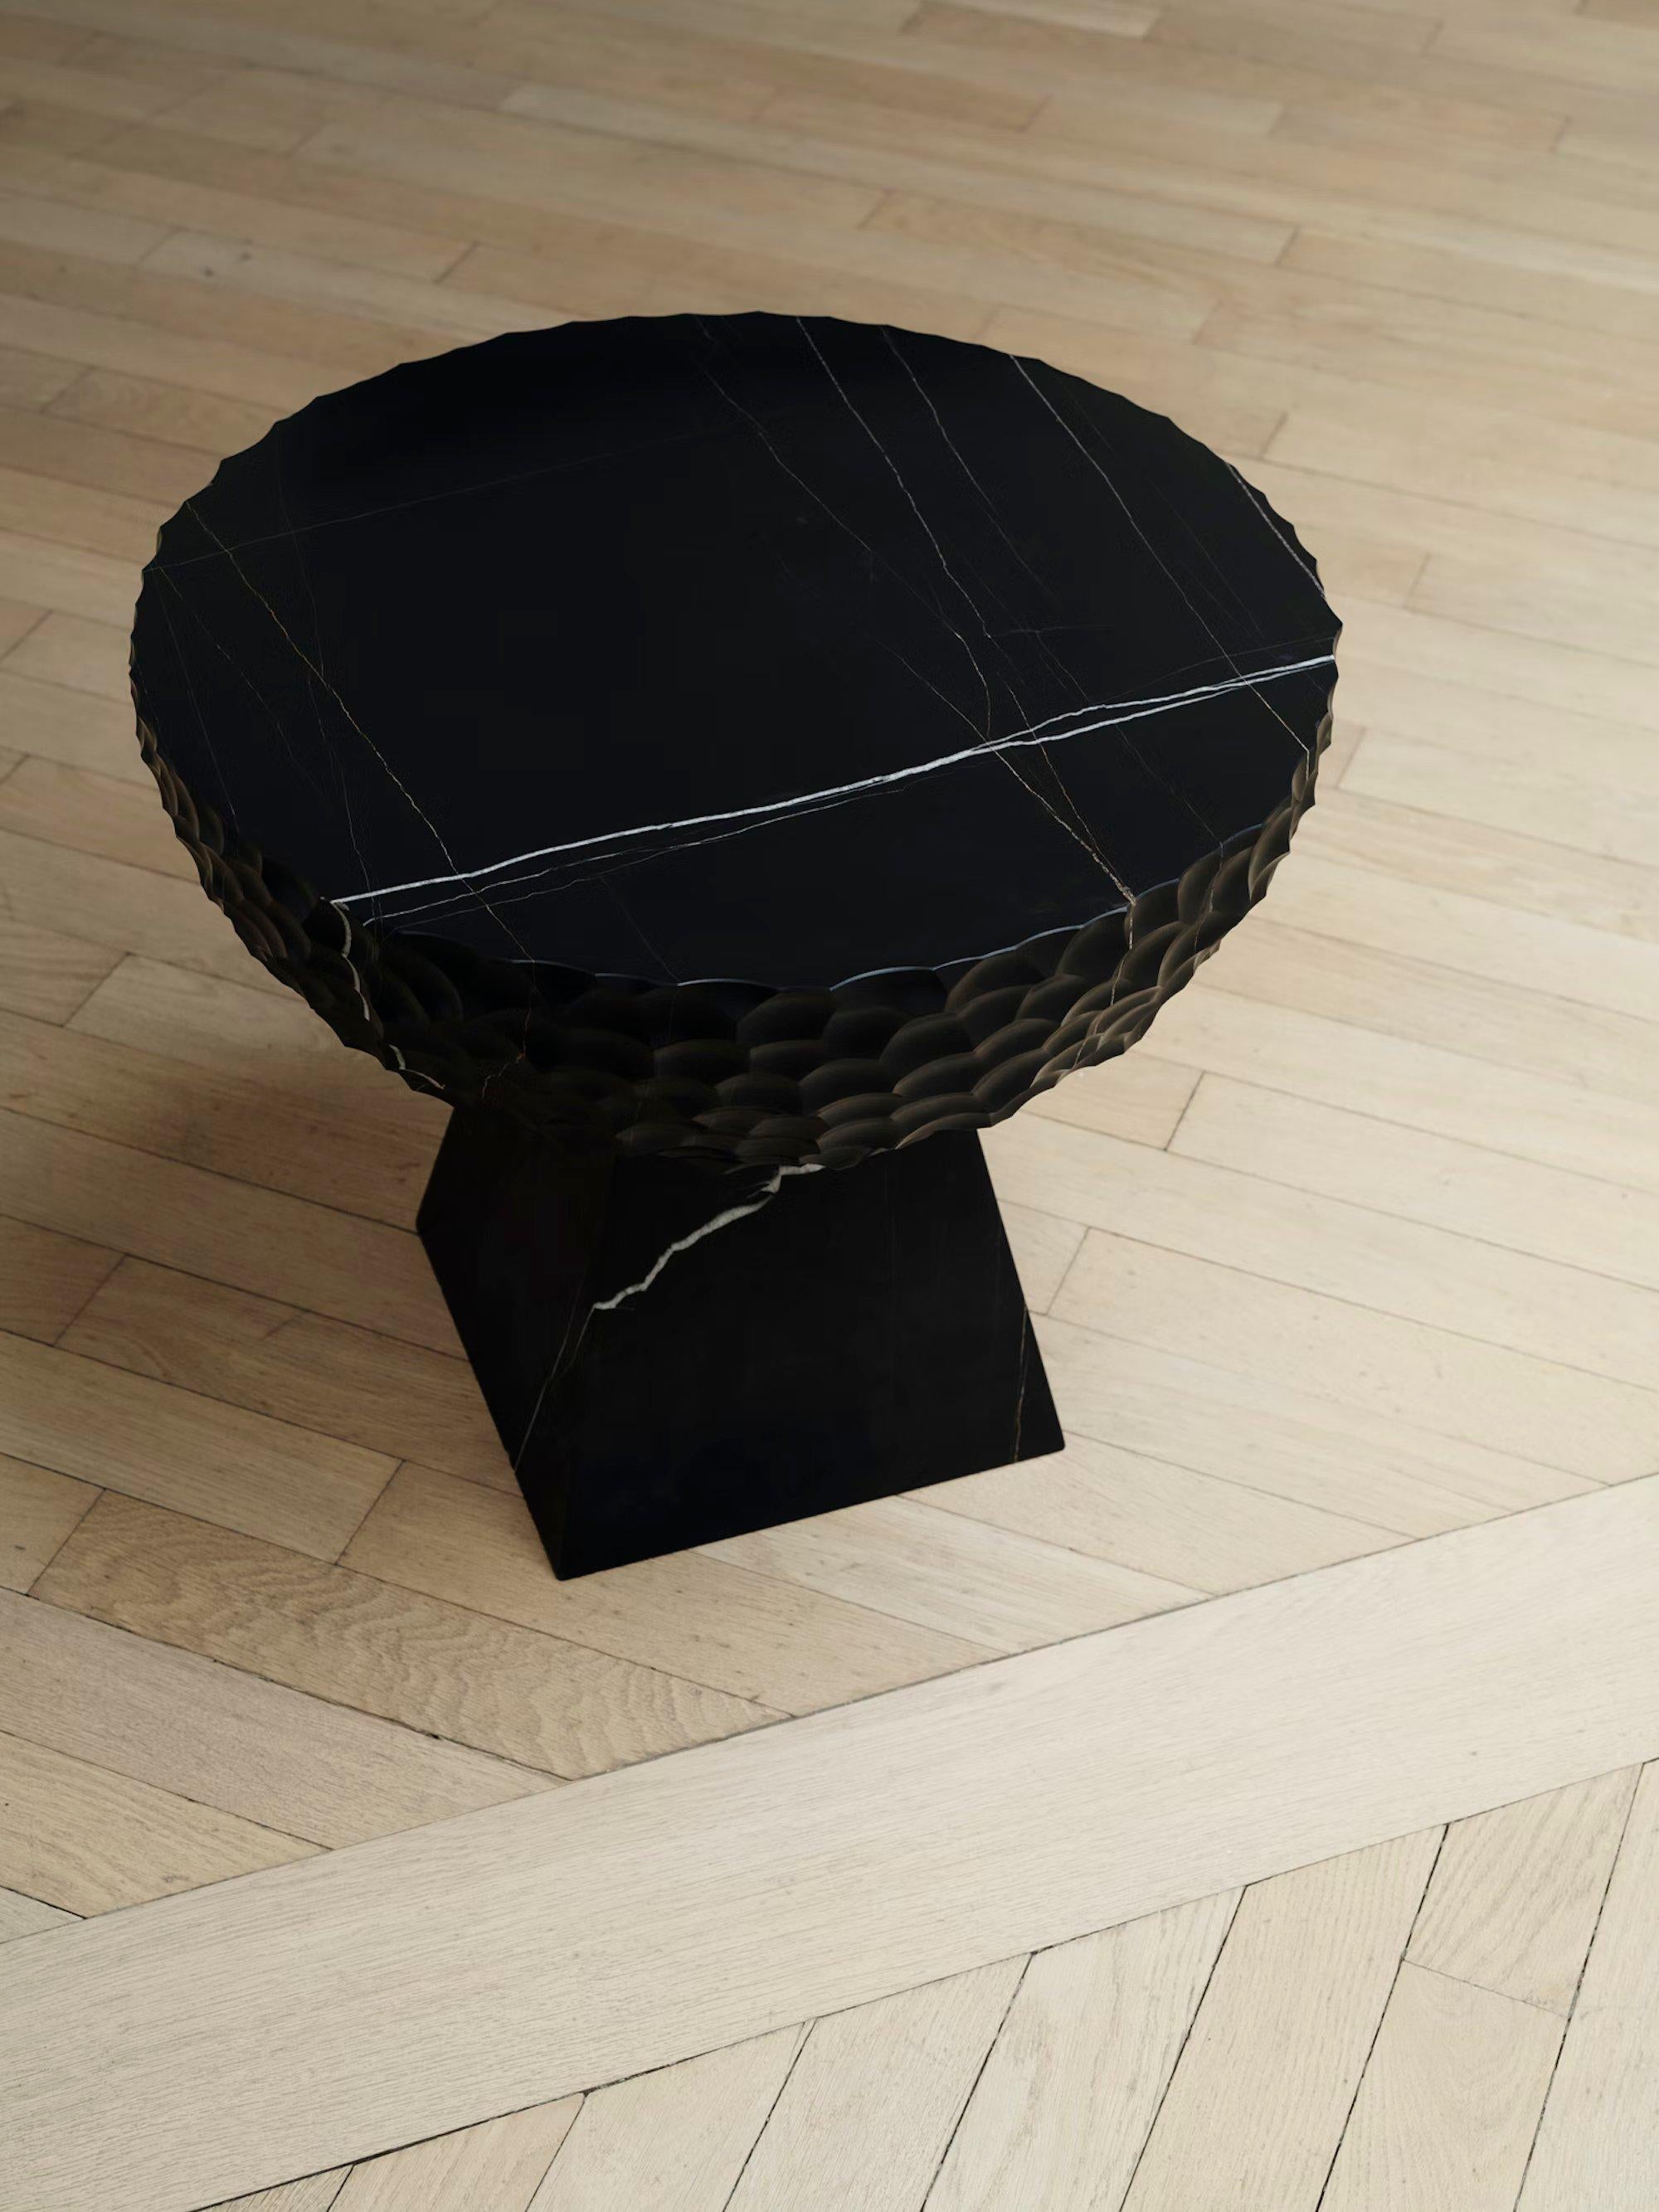 A heavyweight take on the SKS Side Table, the SKS (Small Key Stone Side Table) replicates all of its organic details and hand carved shapes and reframes them in solid Grafite Oro Nera Stone. The mineral’s precise lines and veins add surprising